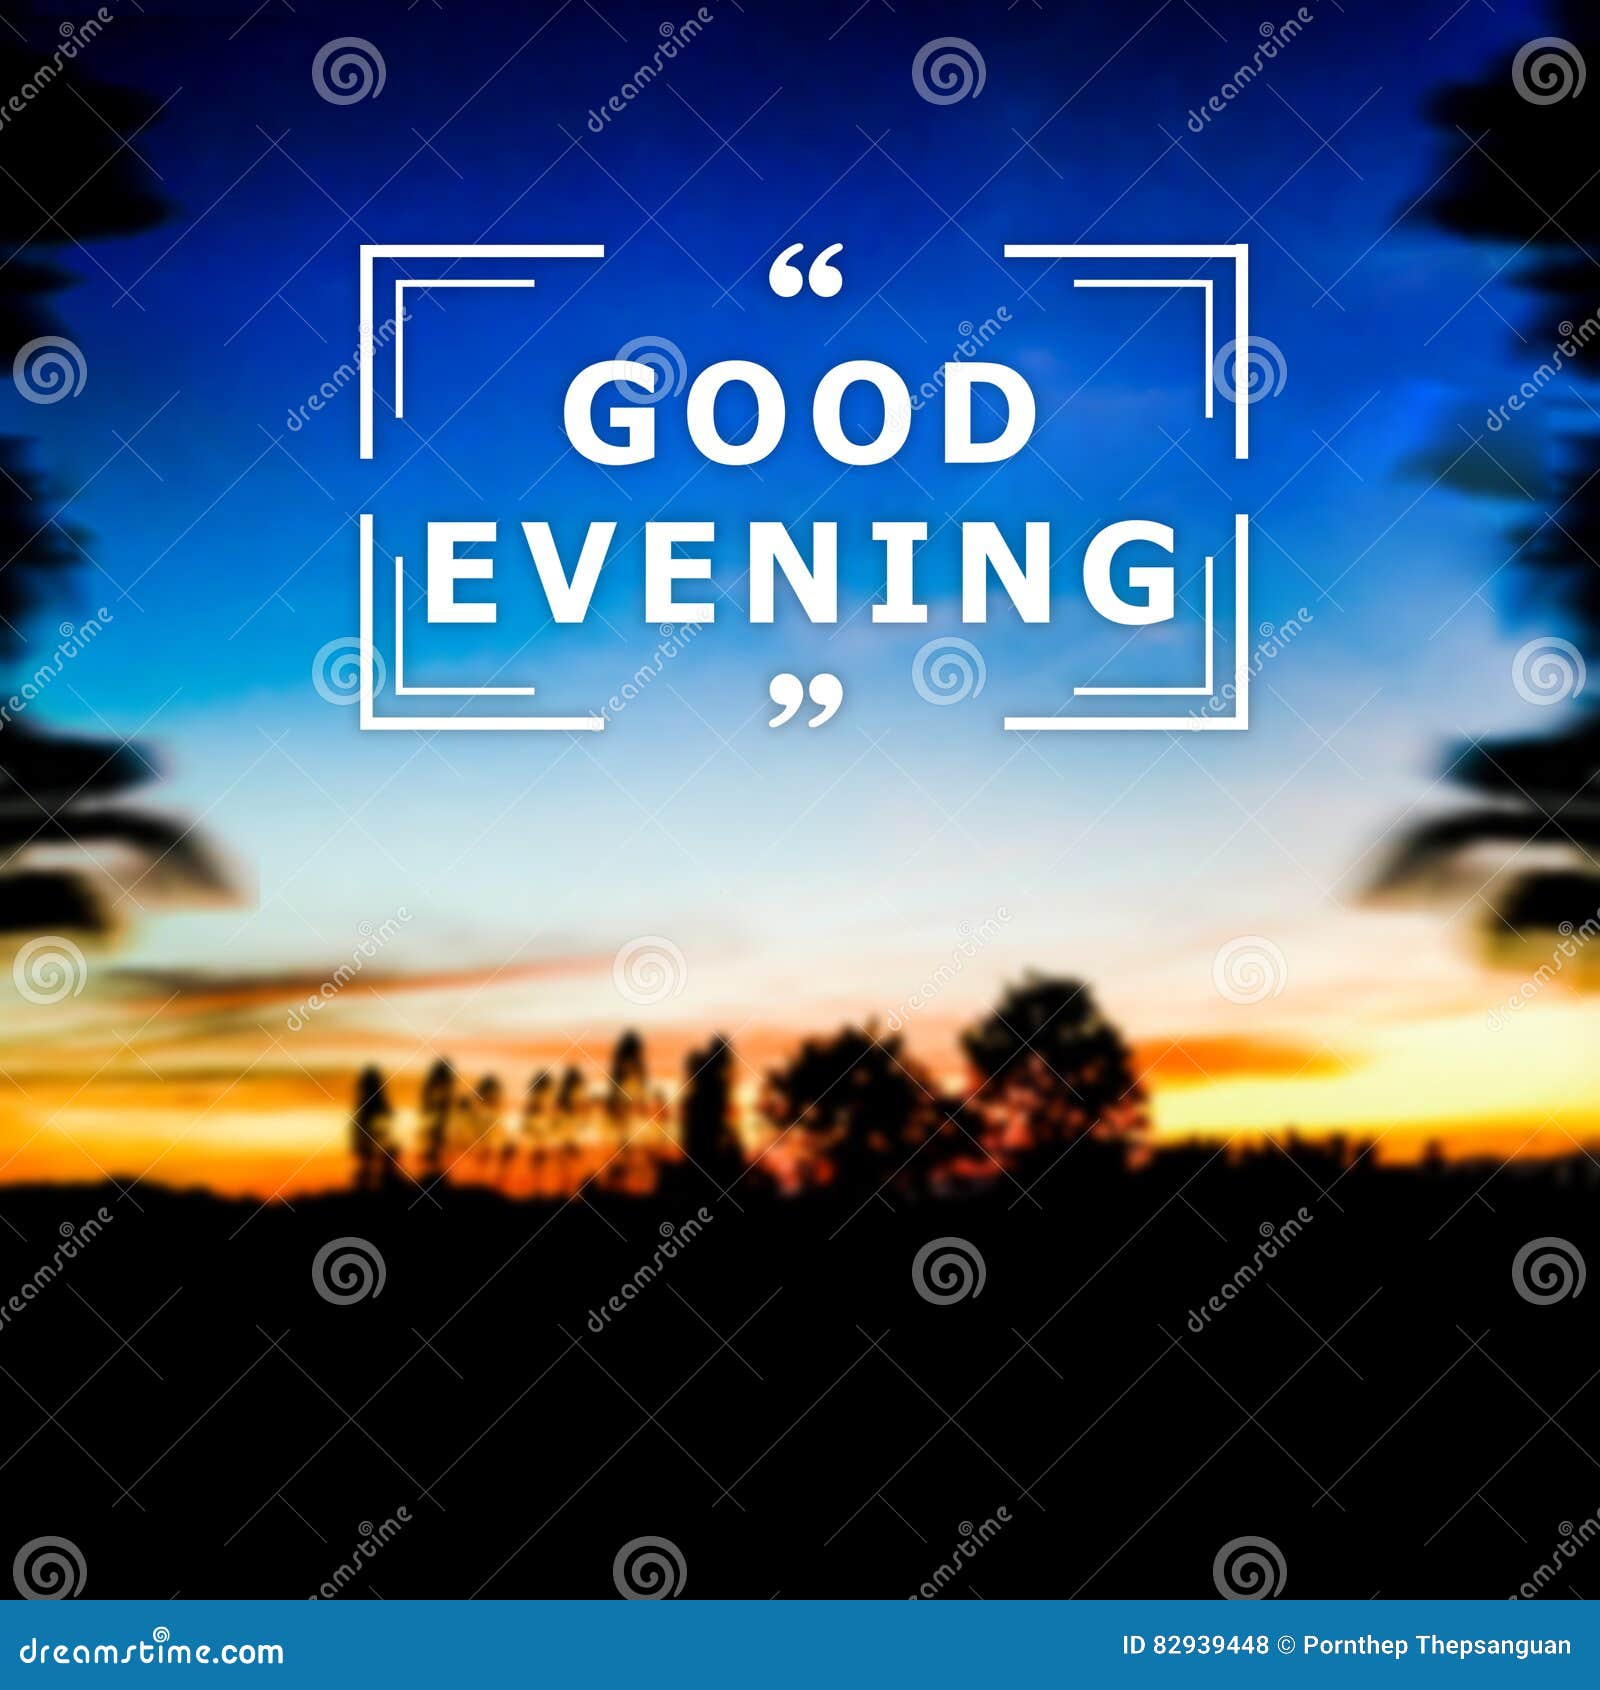 good evening text with blur background.